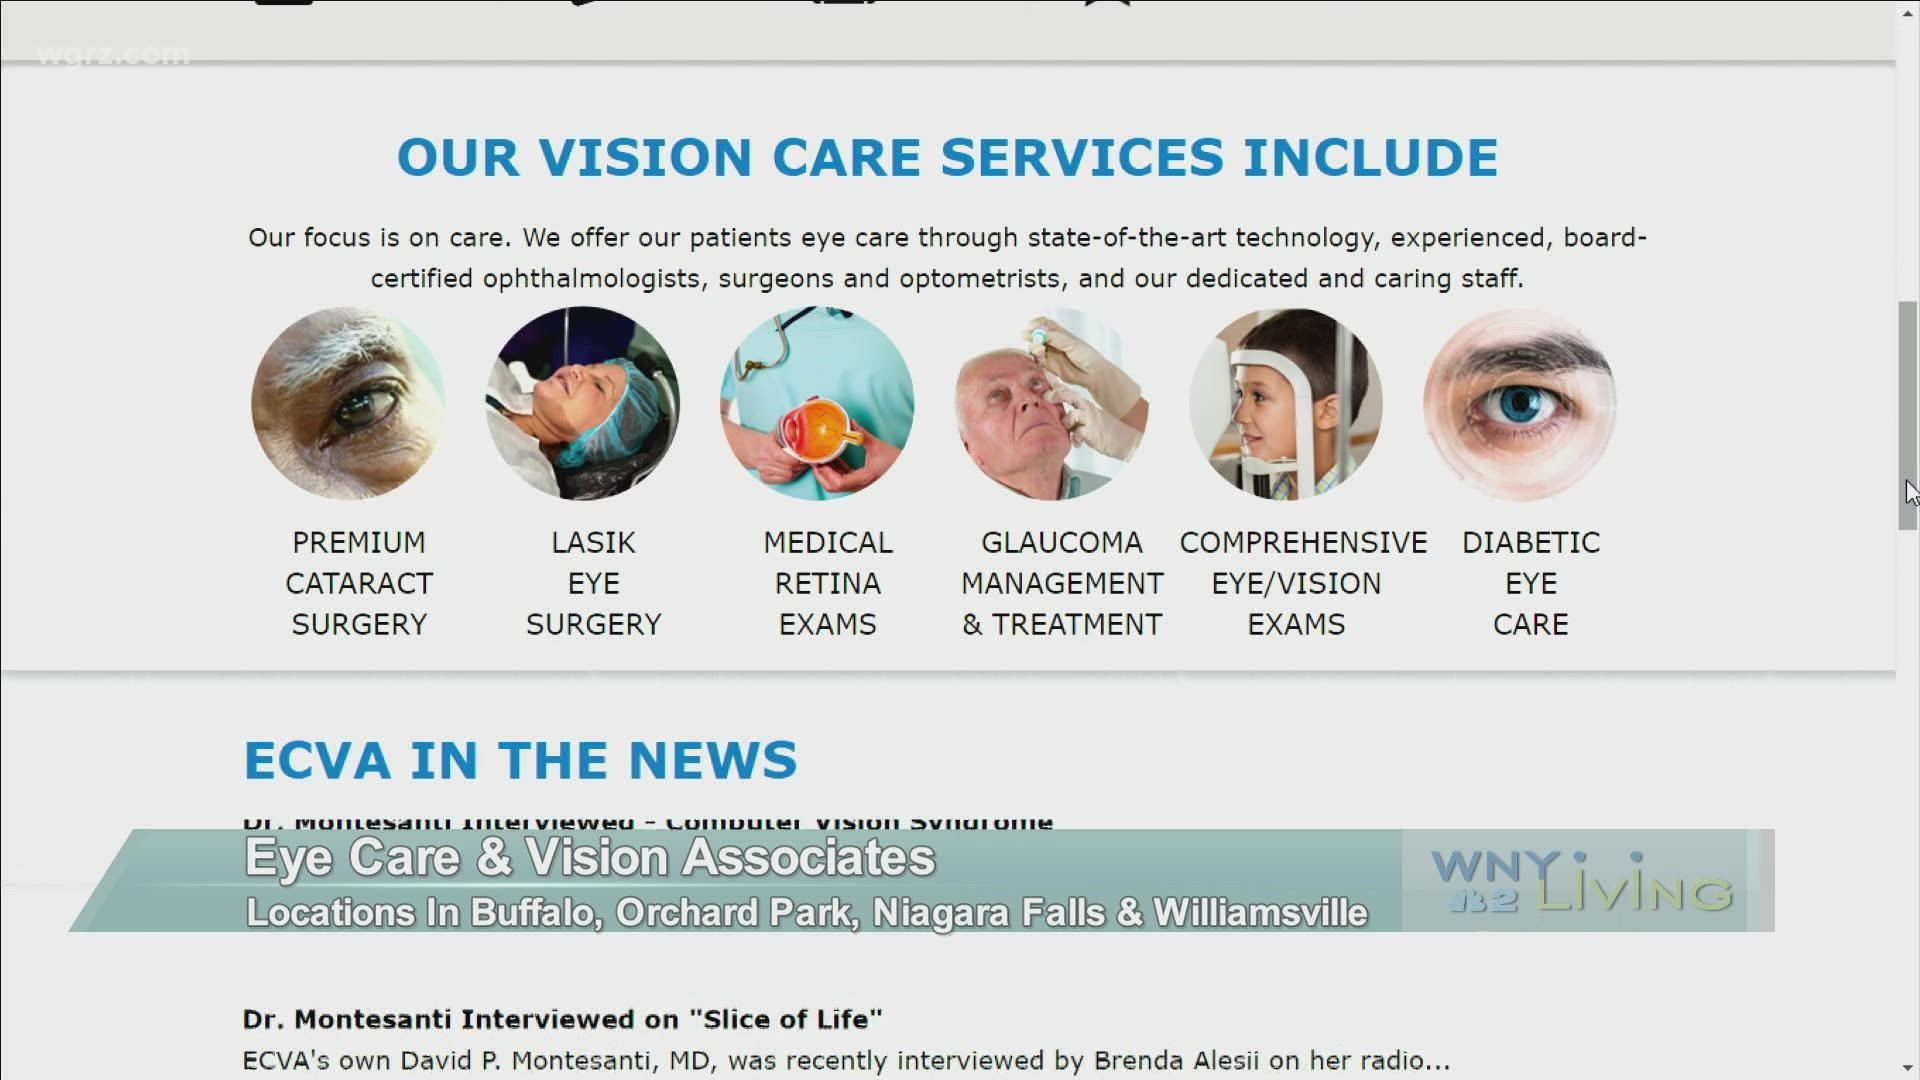 WNY Living - September 25 - Eye Care & Vision Associates (THIS VIDEO IS SPONSORED BY EYE CARE AND VISION ASSOCIATES)